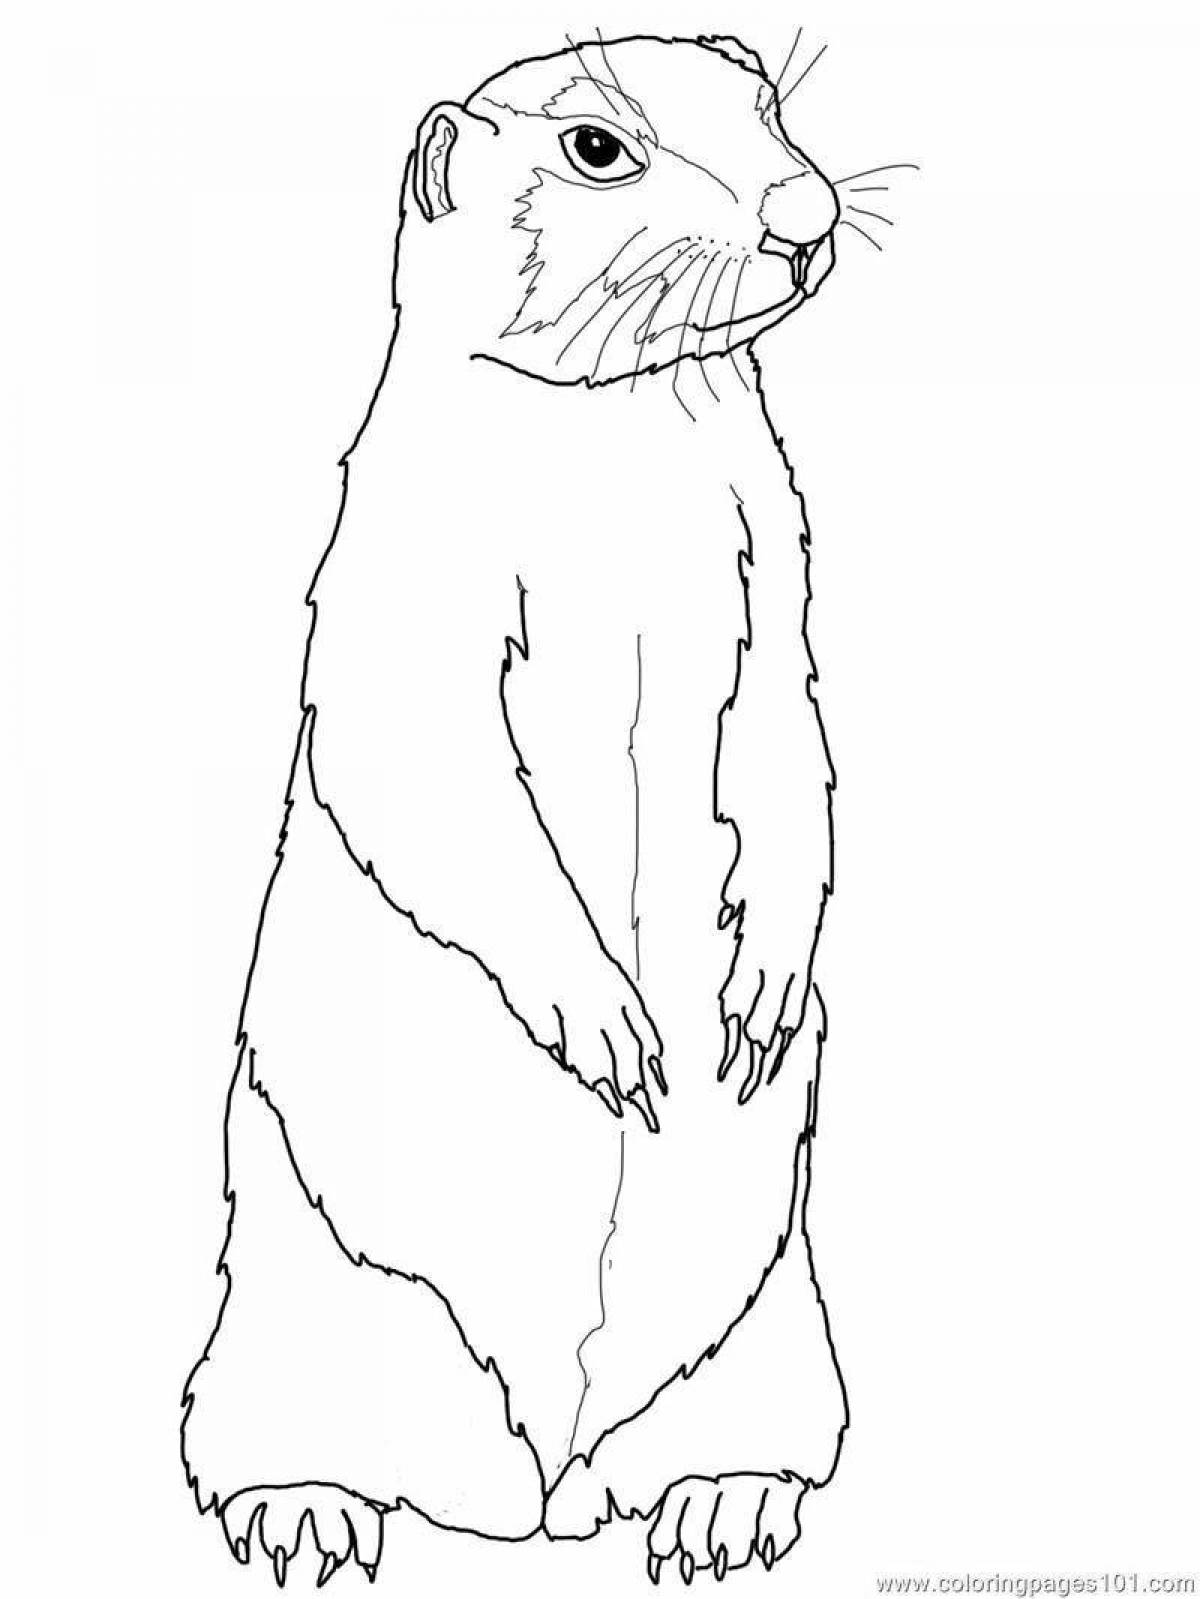 Amazing gopher coloring book for kids